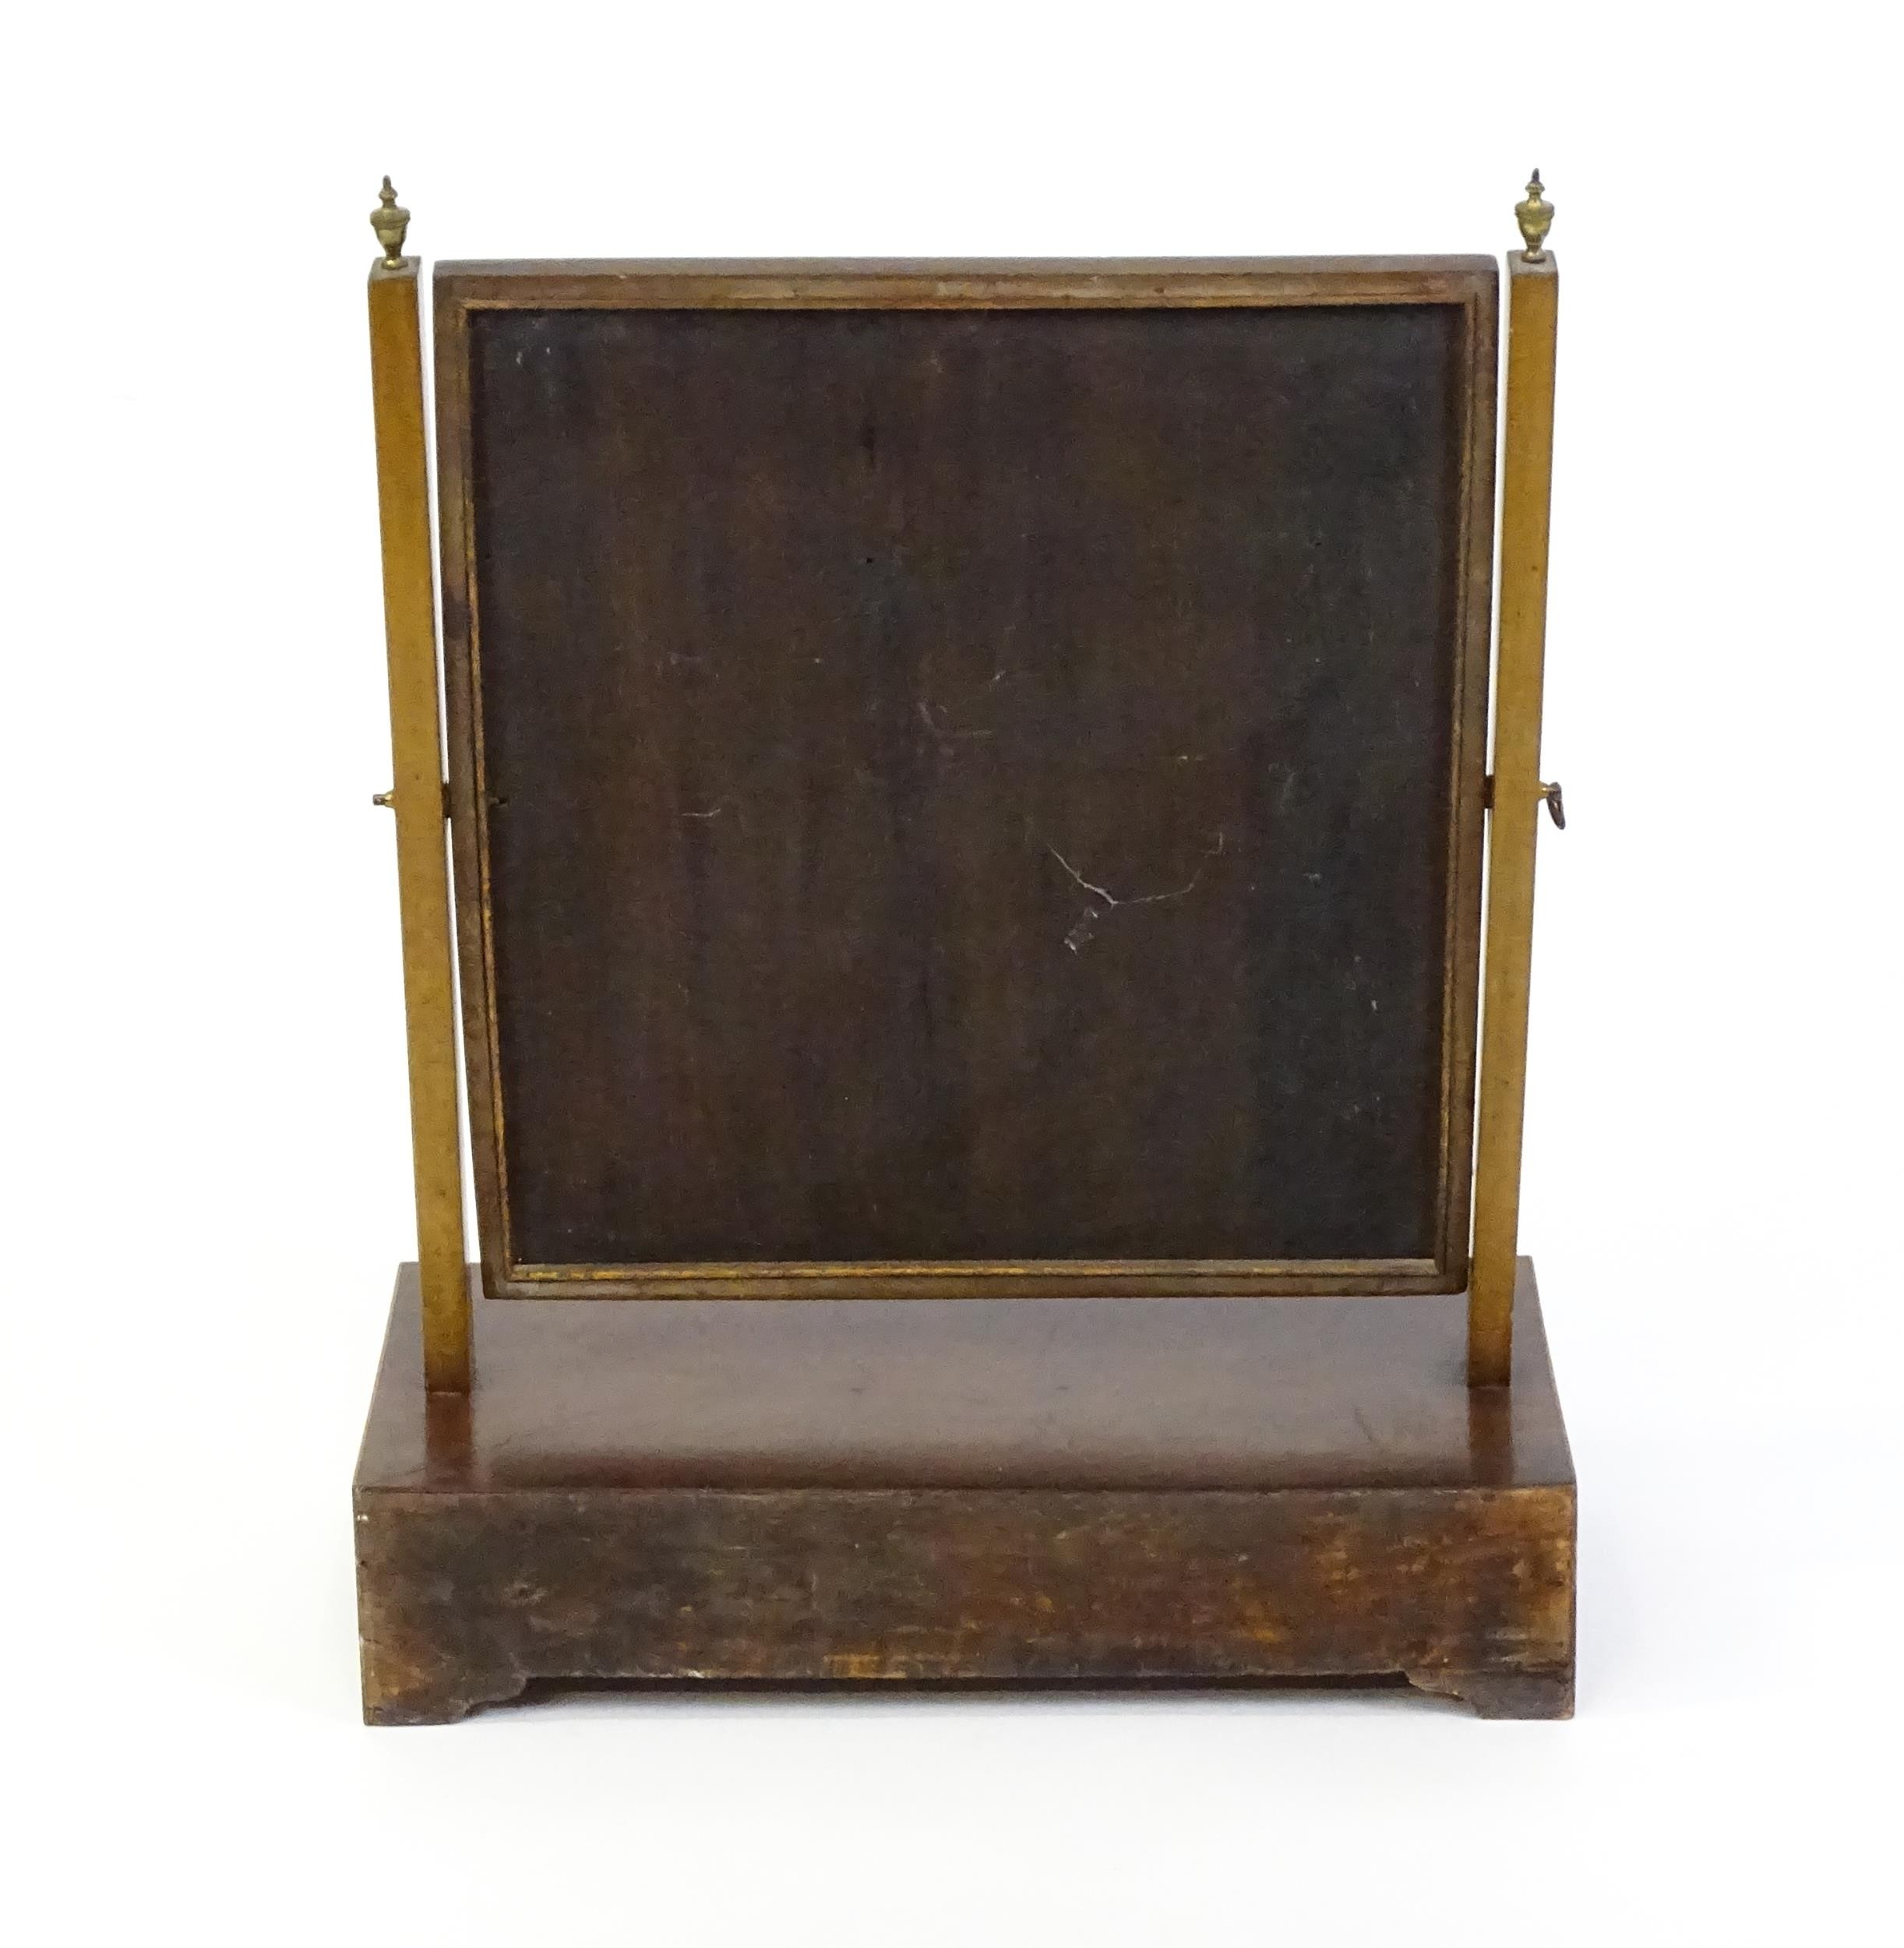 A late 19thC walnut toilet mirror / dressing mirror with satinwood inlay and surmounted by brass - Image 7 of 7